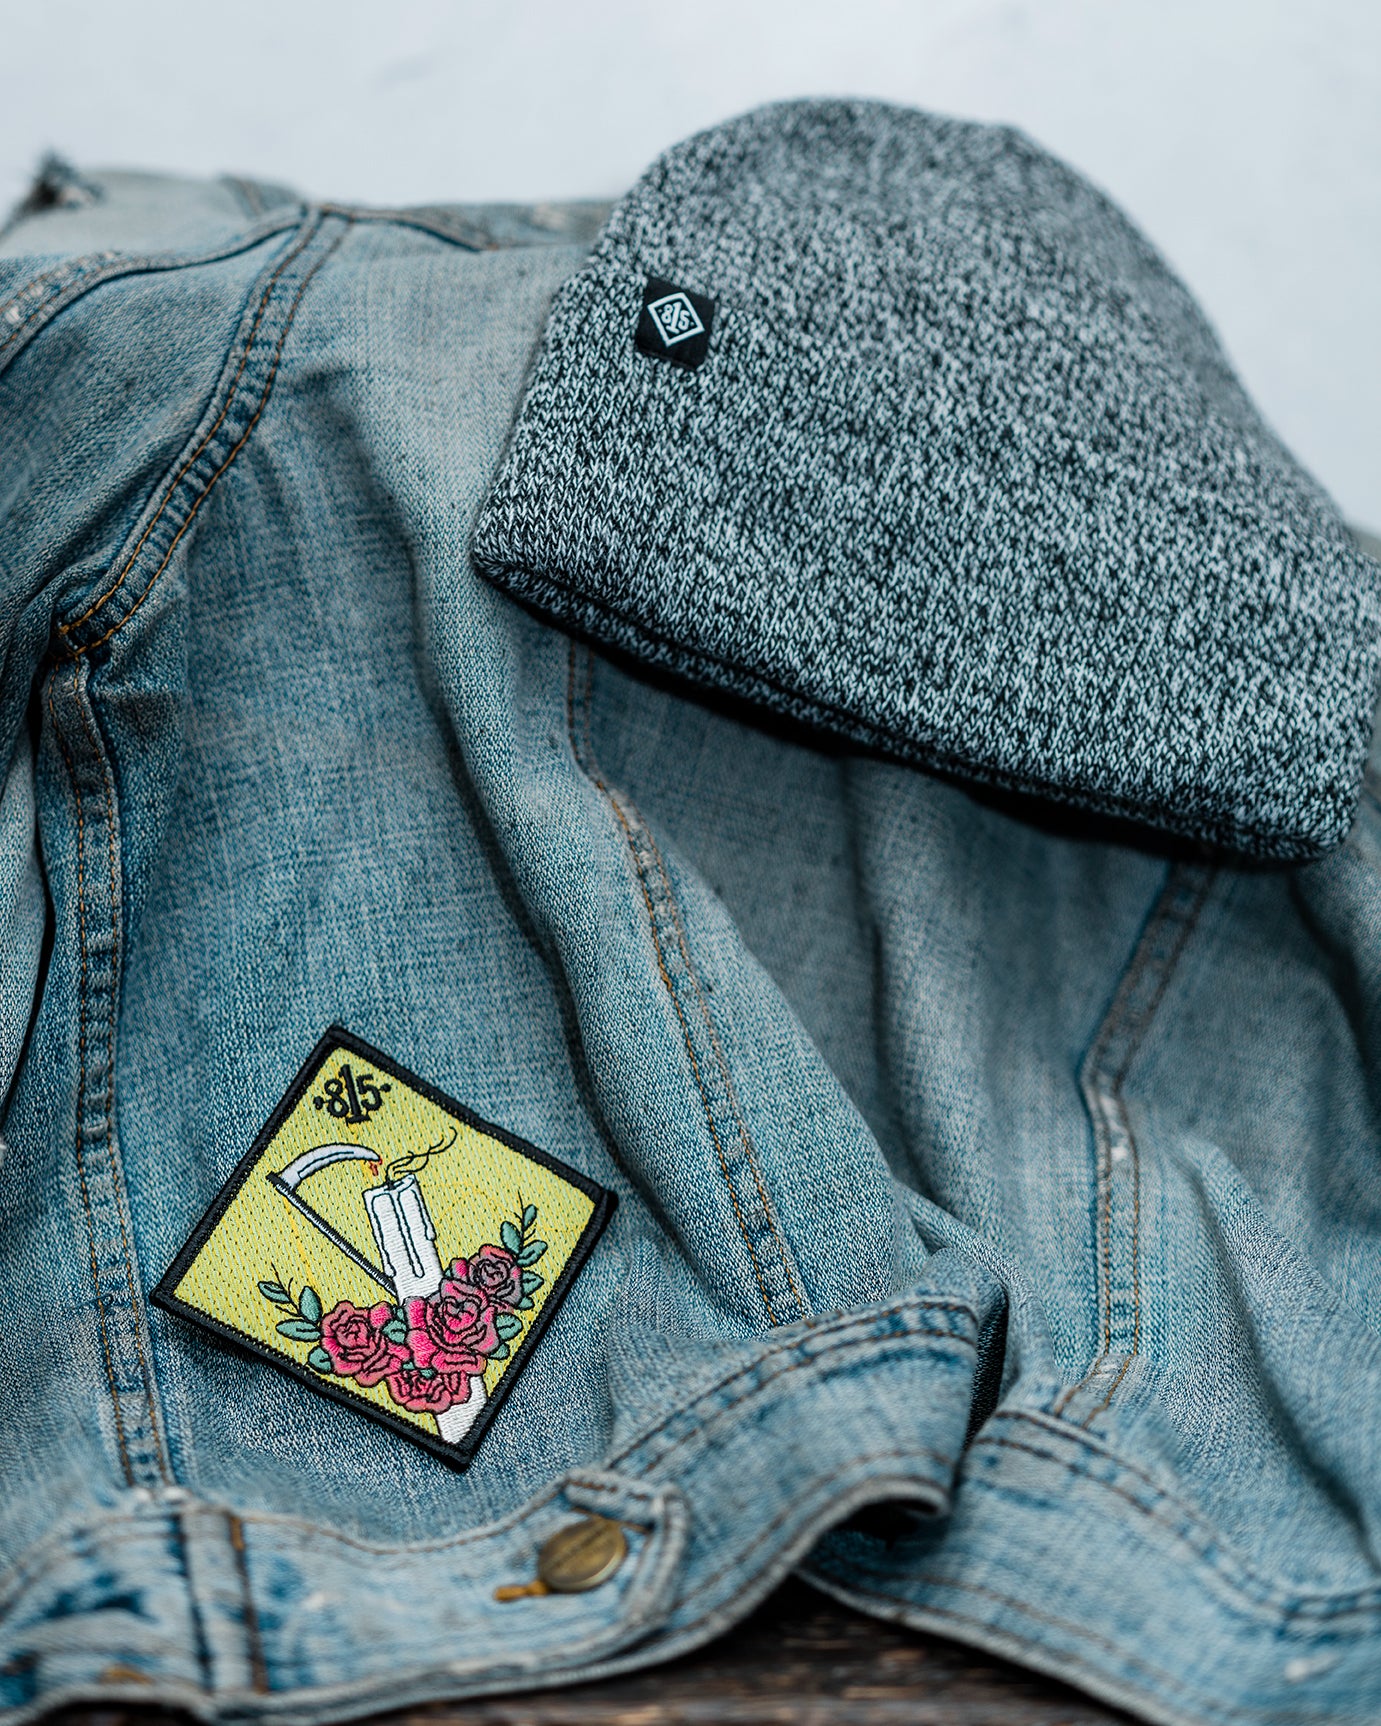 Risky Business - Outdoor Beanie - Travel - Outfit - Adventure - Denim - Patch